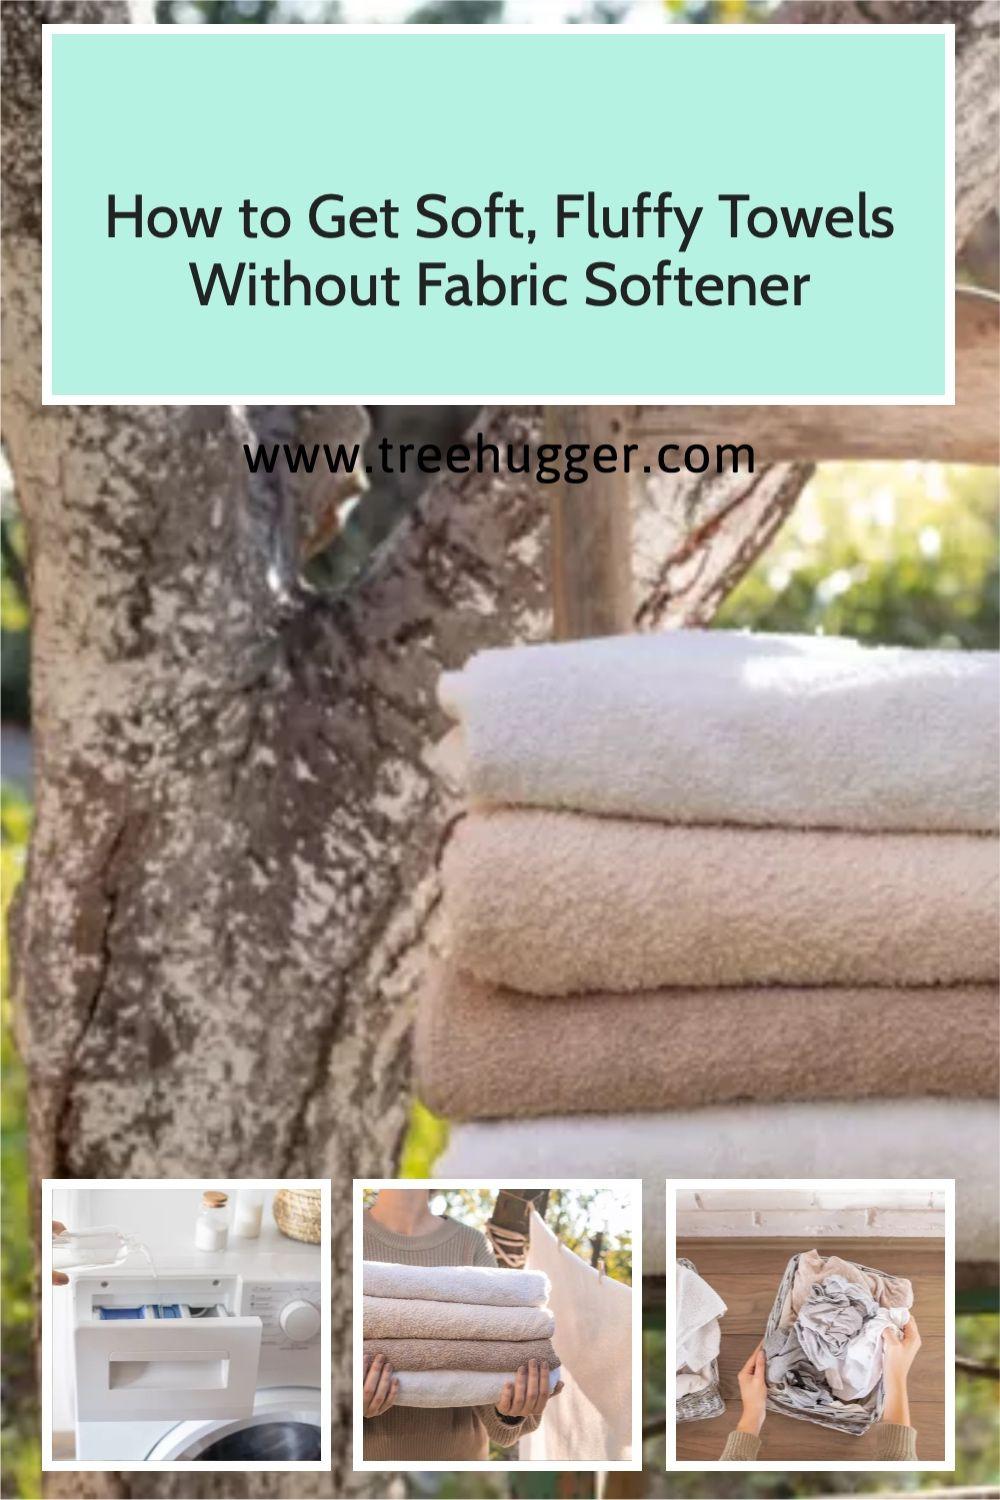 How to Get Soft, Fluffy Towels Without Fabric Softener 